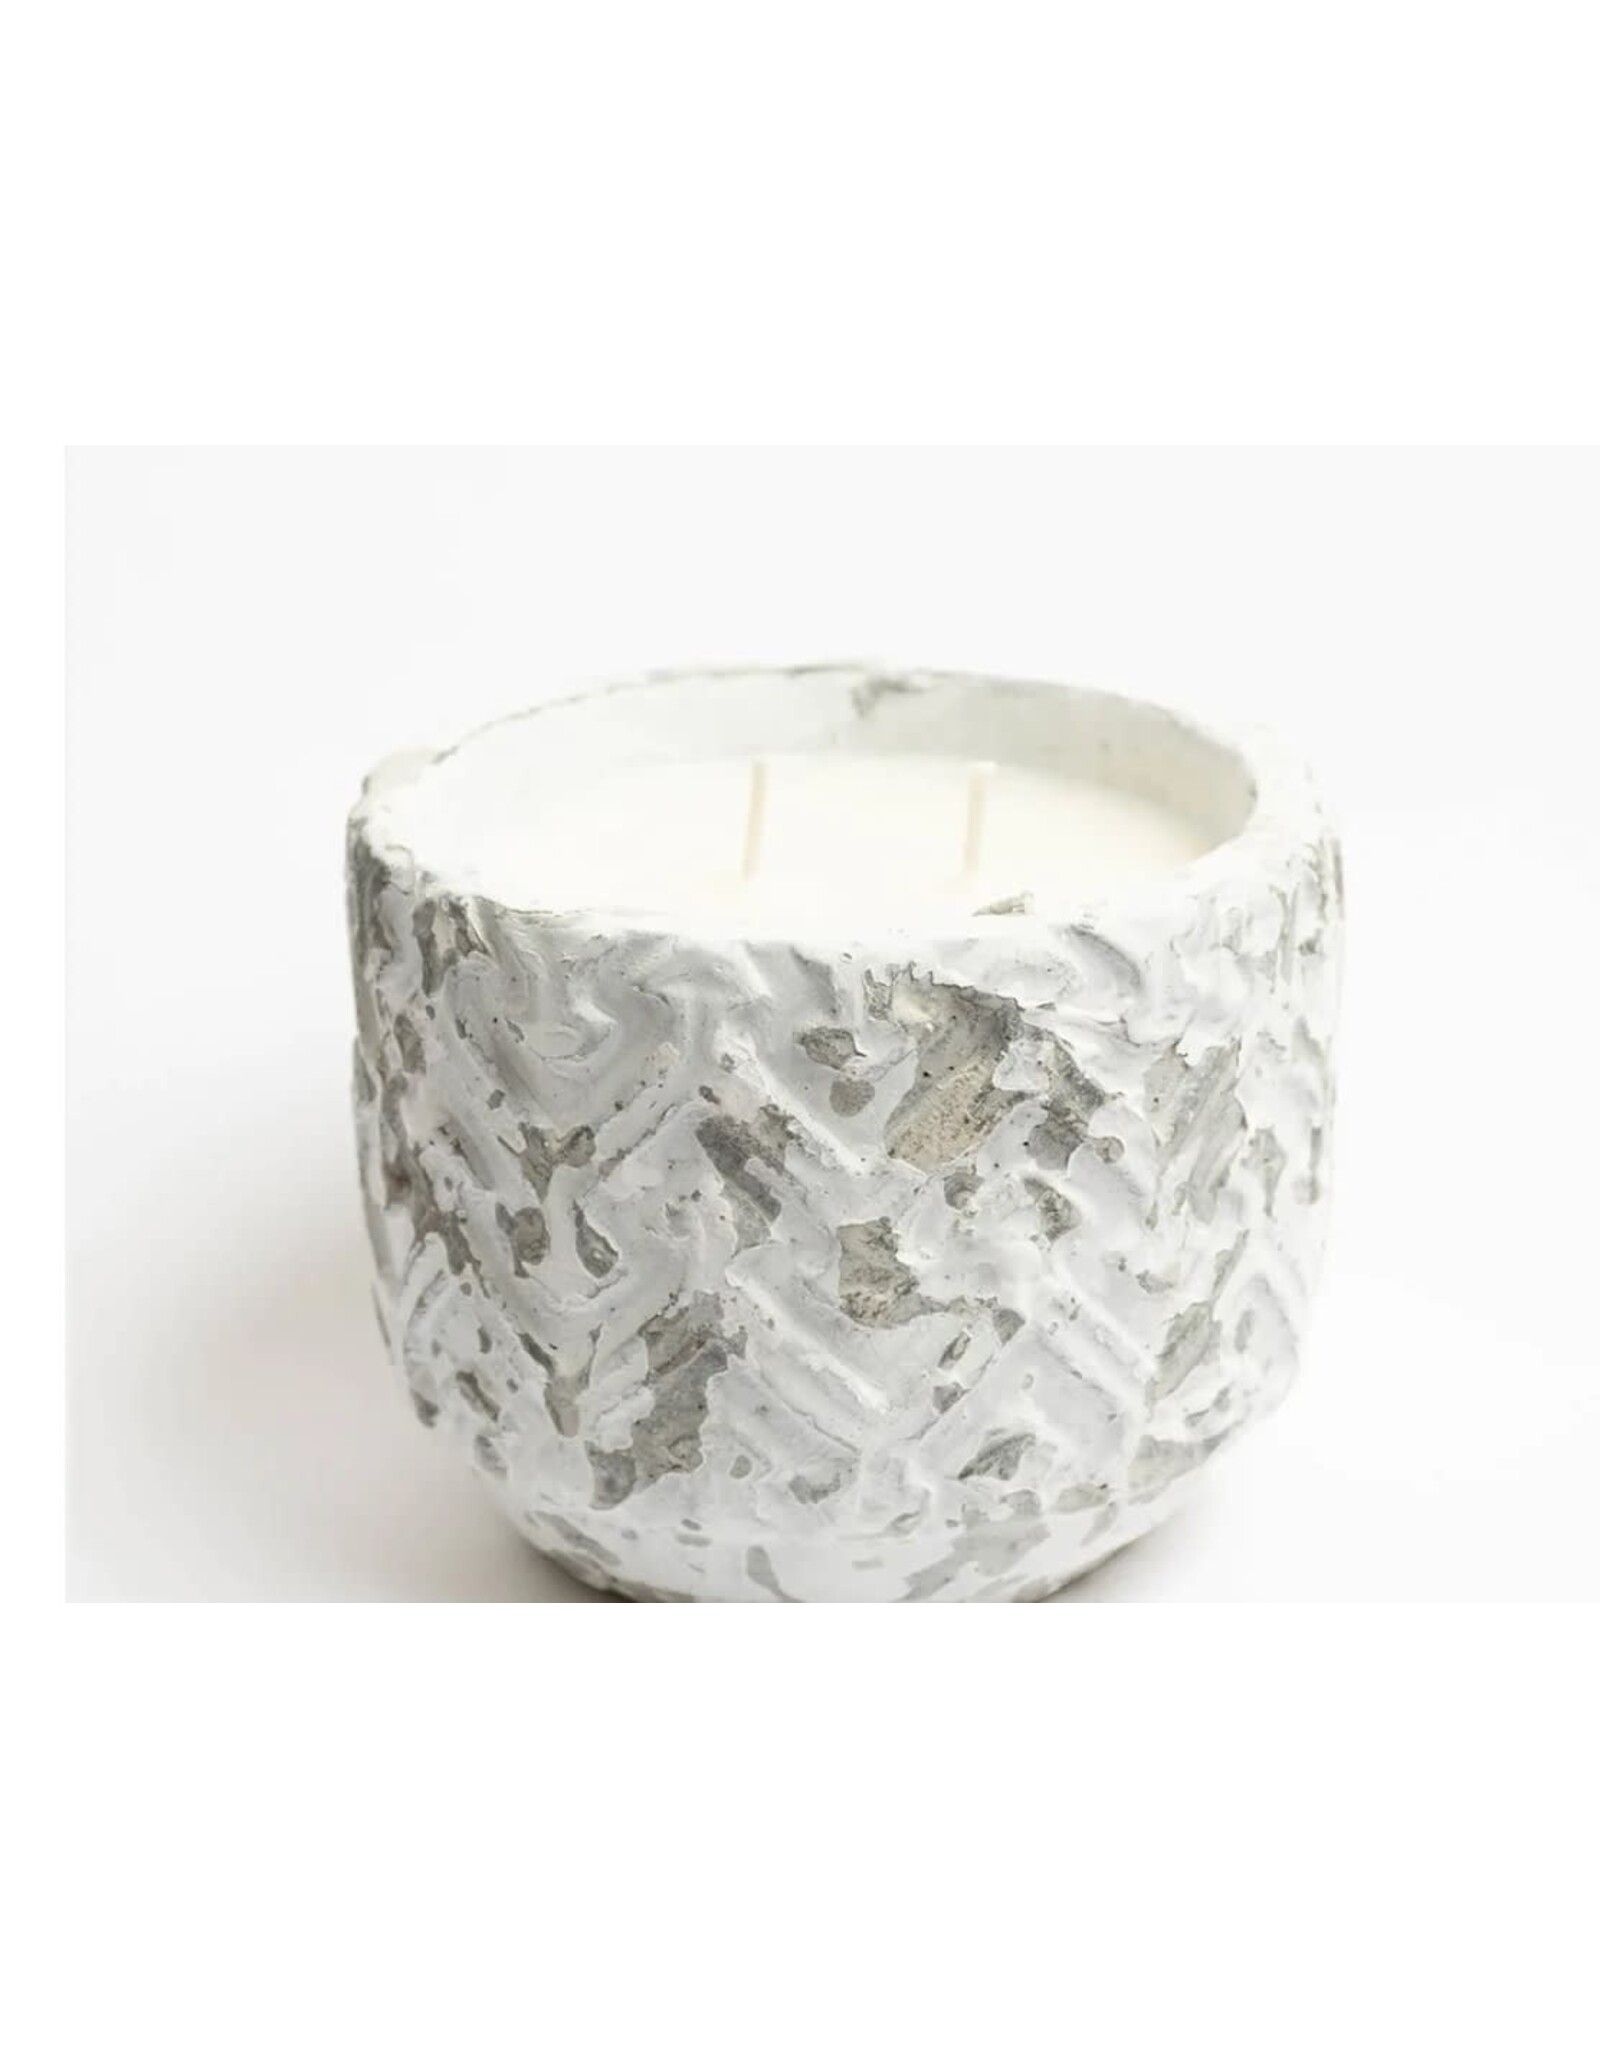 Southern Lights Candle CoCo Santal Rustic Concrete Candle